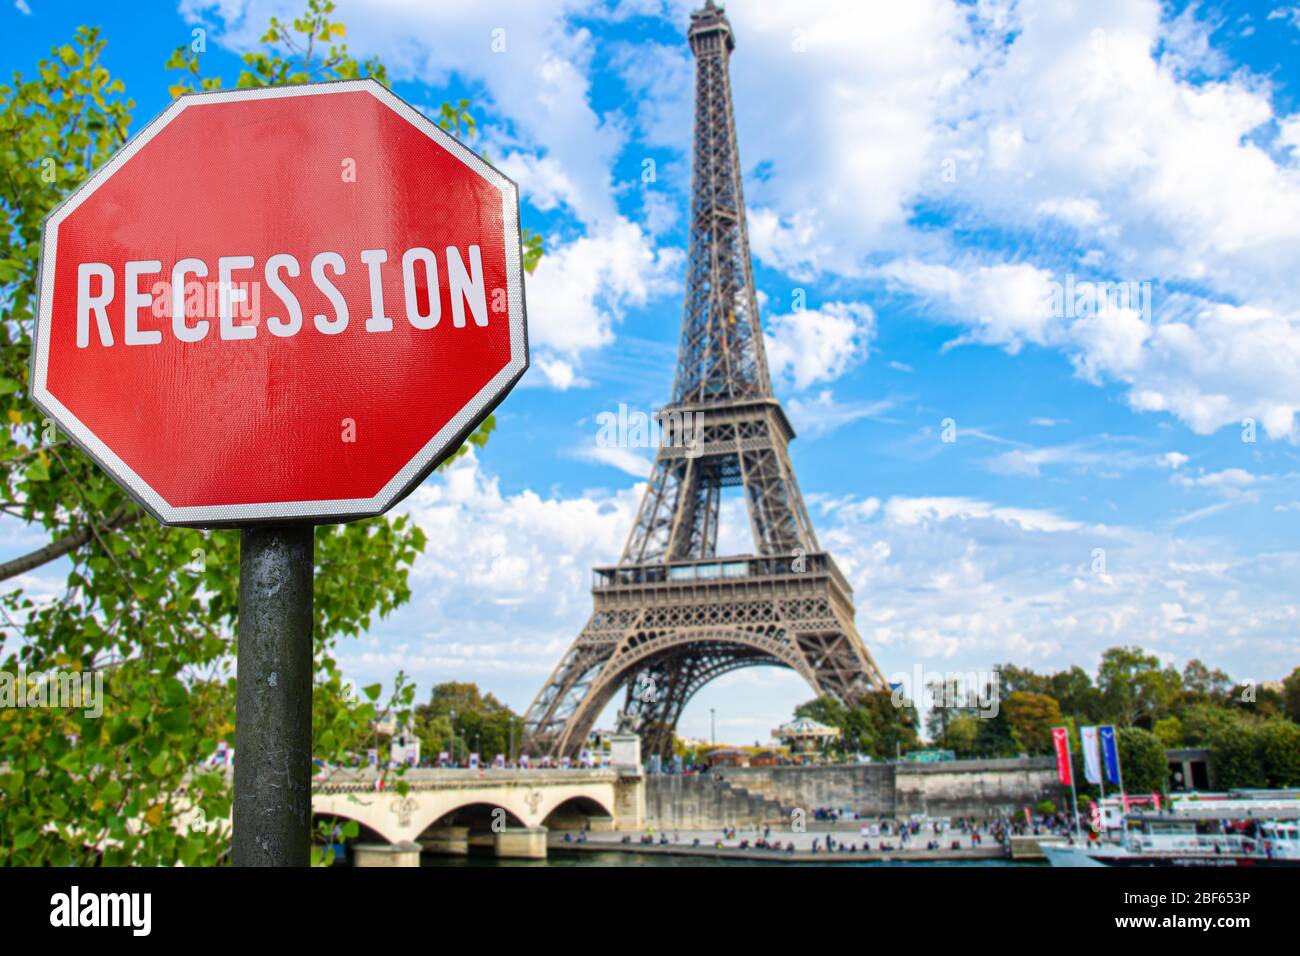 Recession stop sign with view of Eiffel tower in Paris, France. Financial crash in world economy because of coronavirus pandemic. Stock Photo